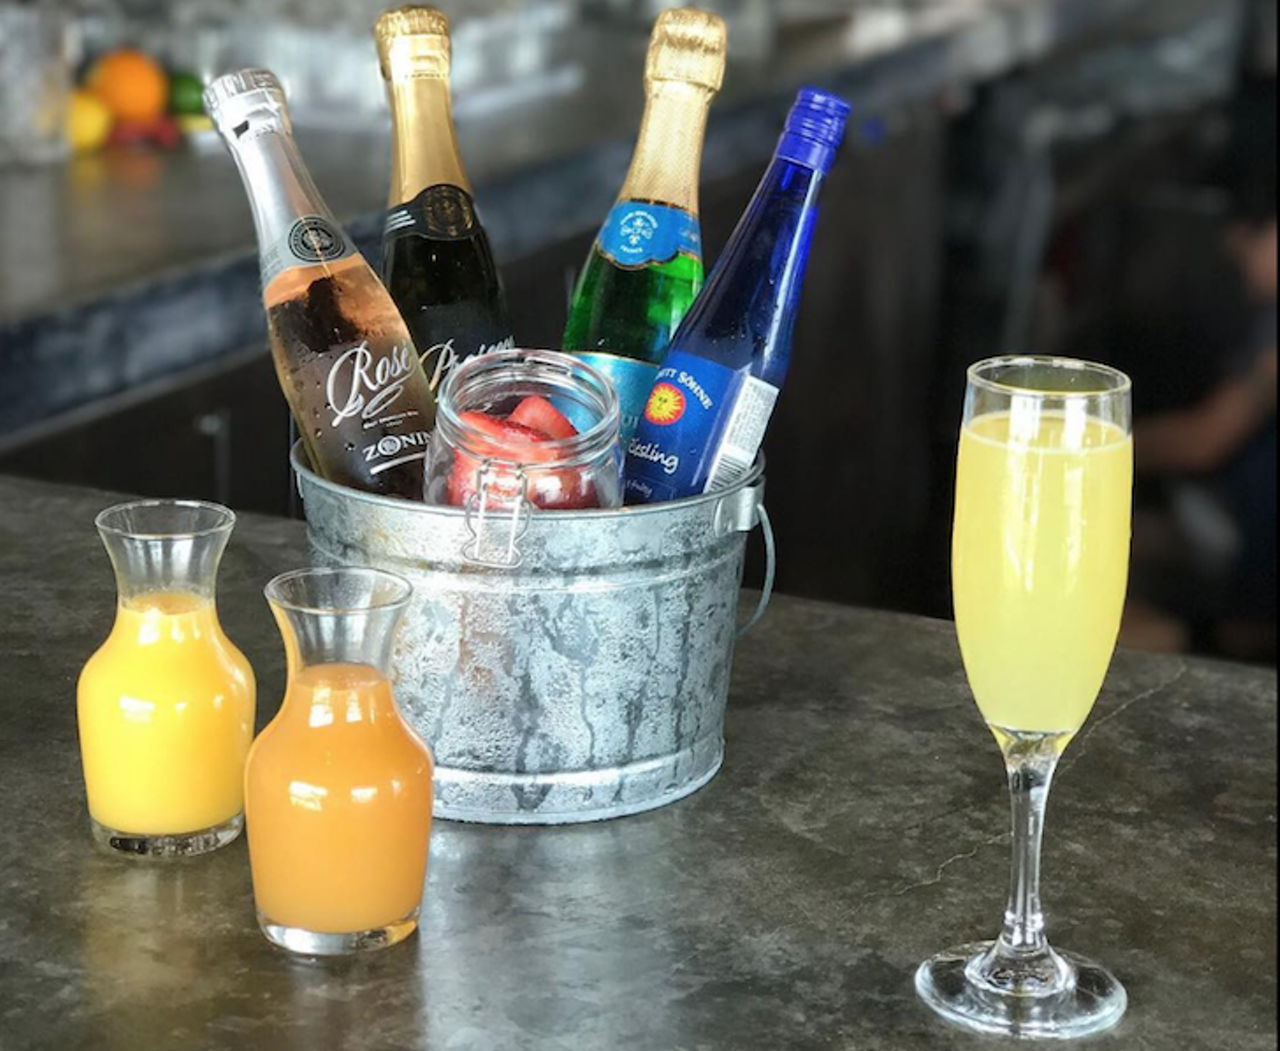 Noble Crust  
Multiple locations
Noble Crust comes in at our best deal for bottomless mimosas at $8! This deal runs for the full brunch period, 10:30 a.m. to 2:30 p.m., every Saturday. 
Photo via Noble Crust/Facebook